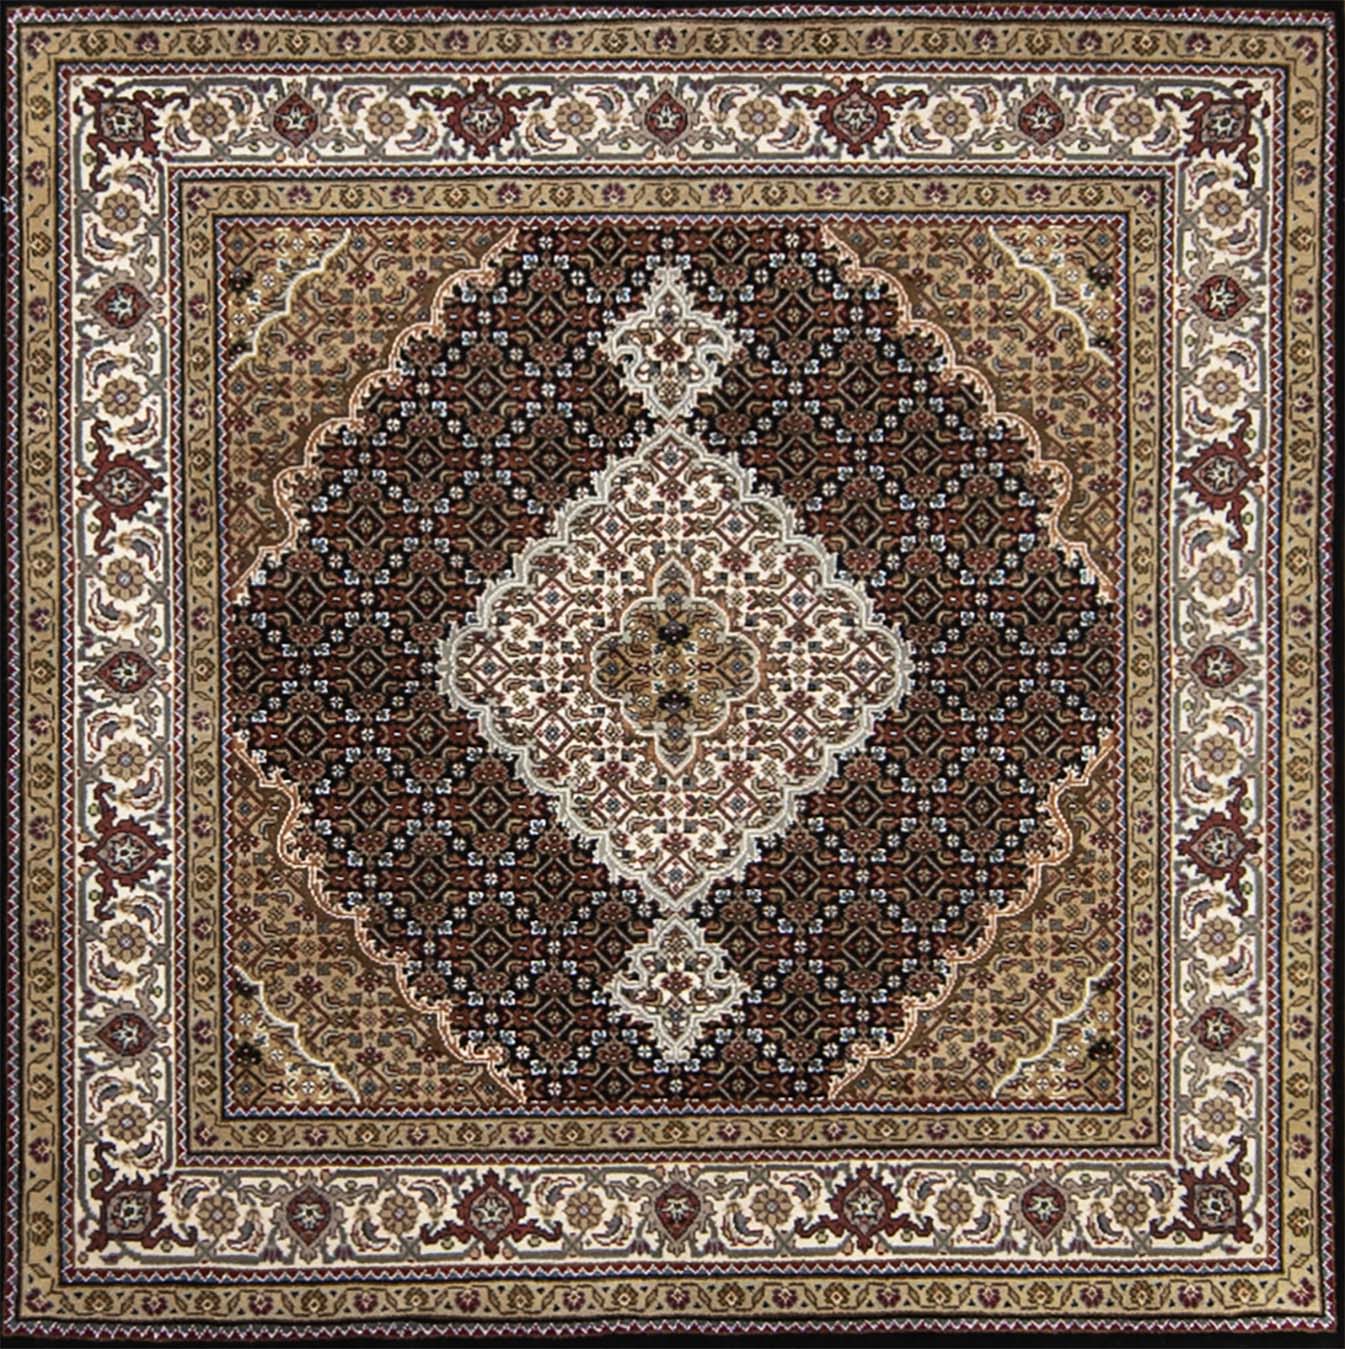 Kitchen rugs. Handmade 5x5 square rug for kitchen in black color made in India.